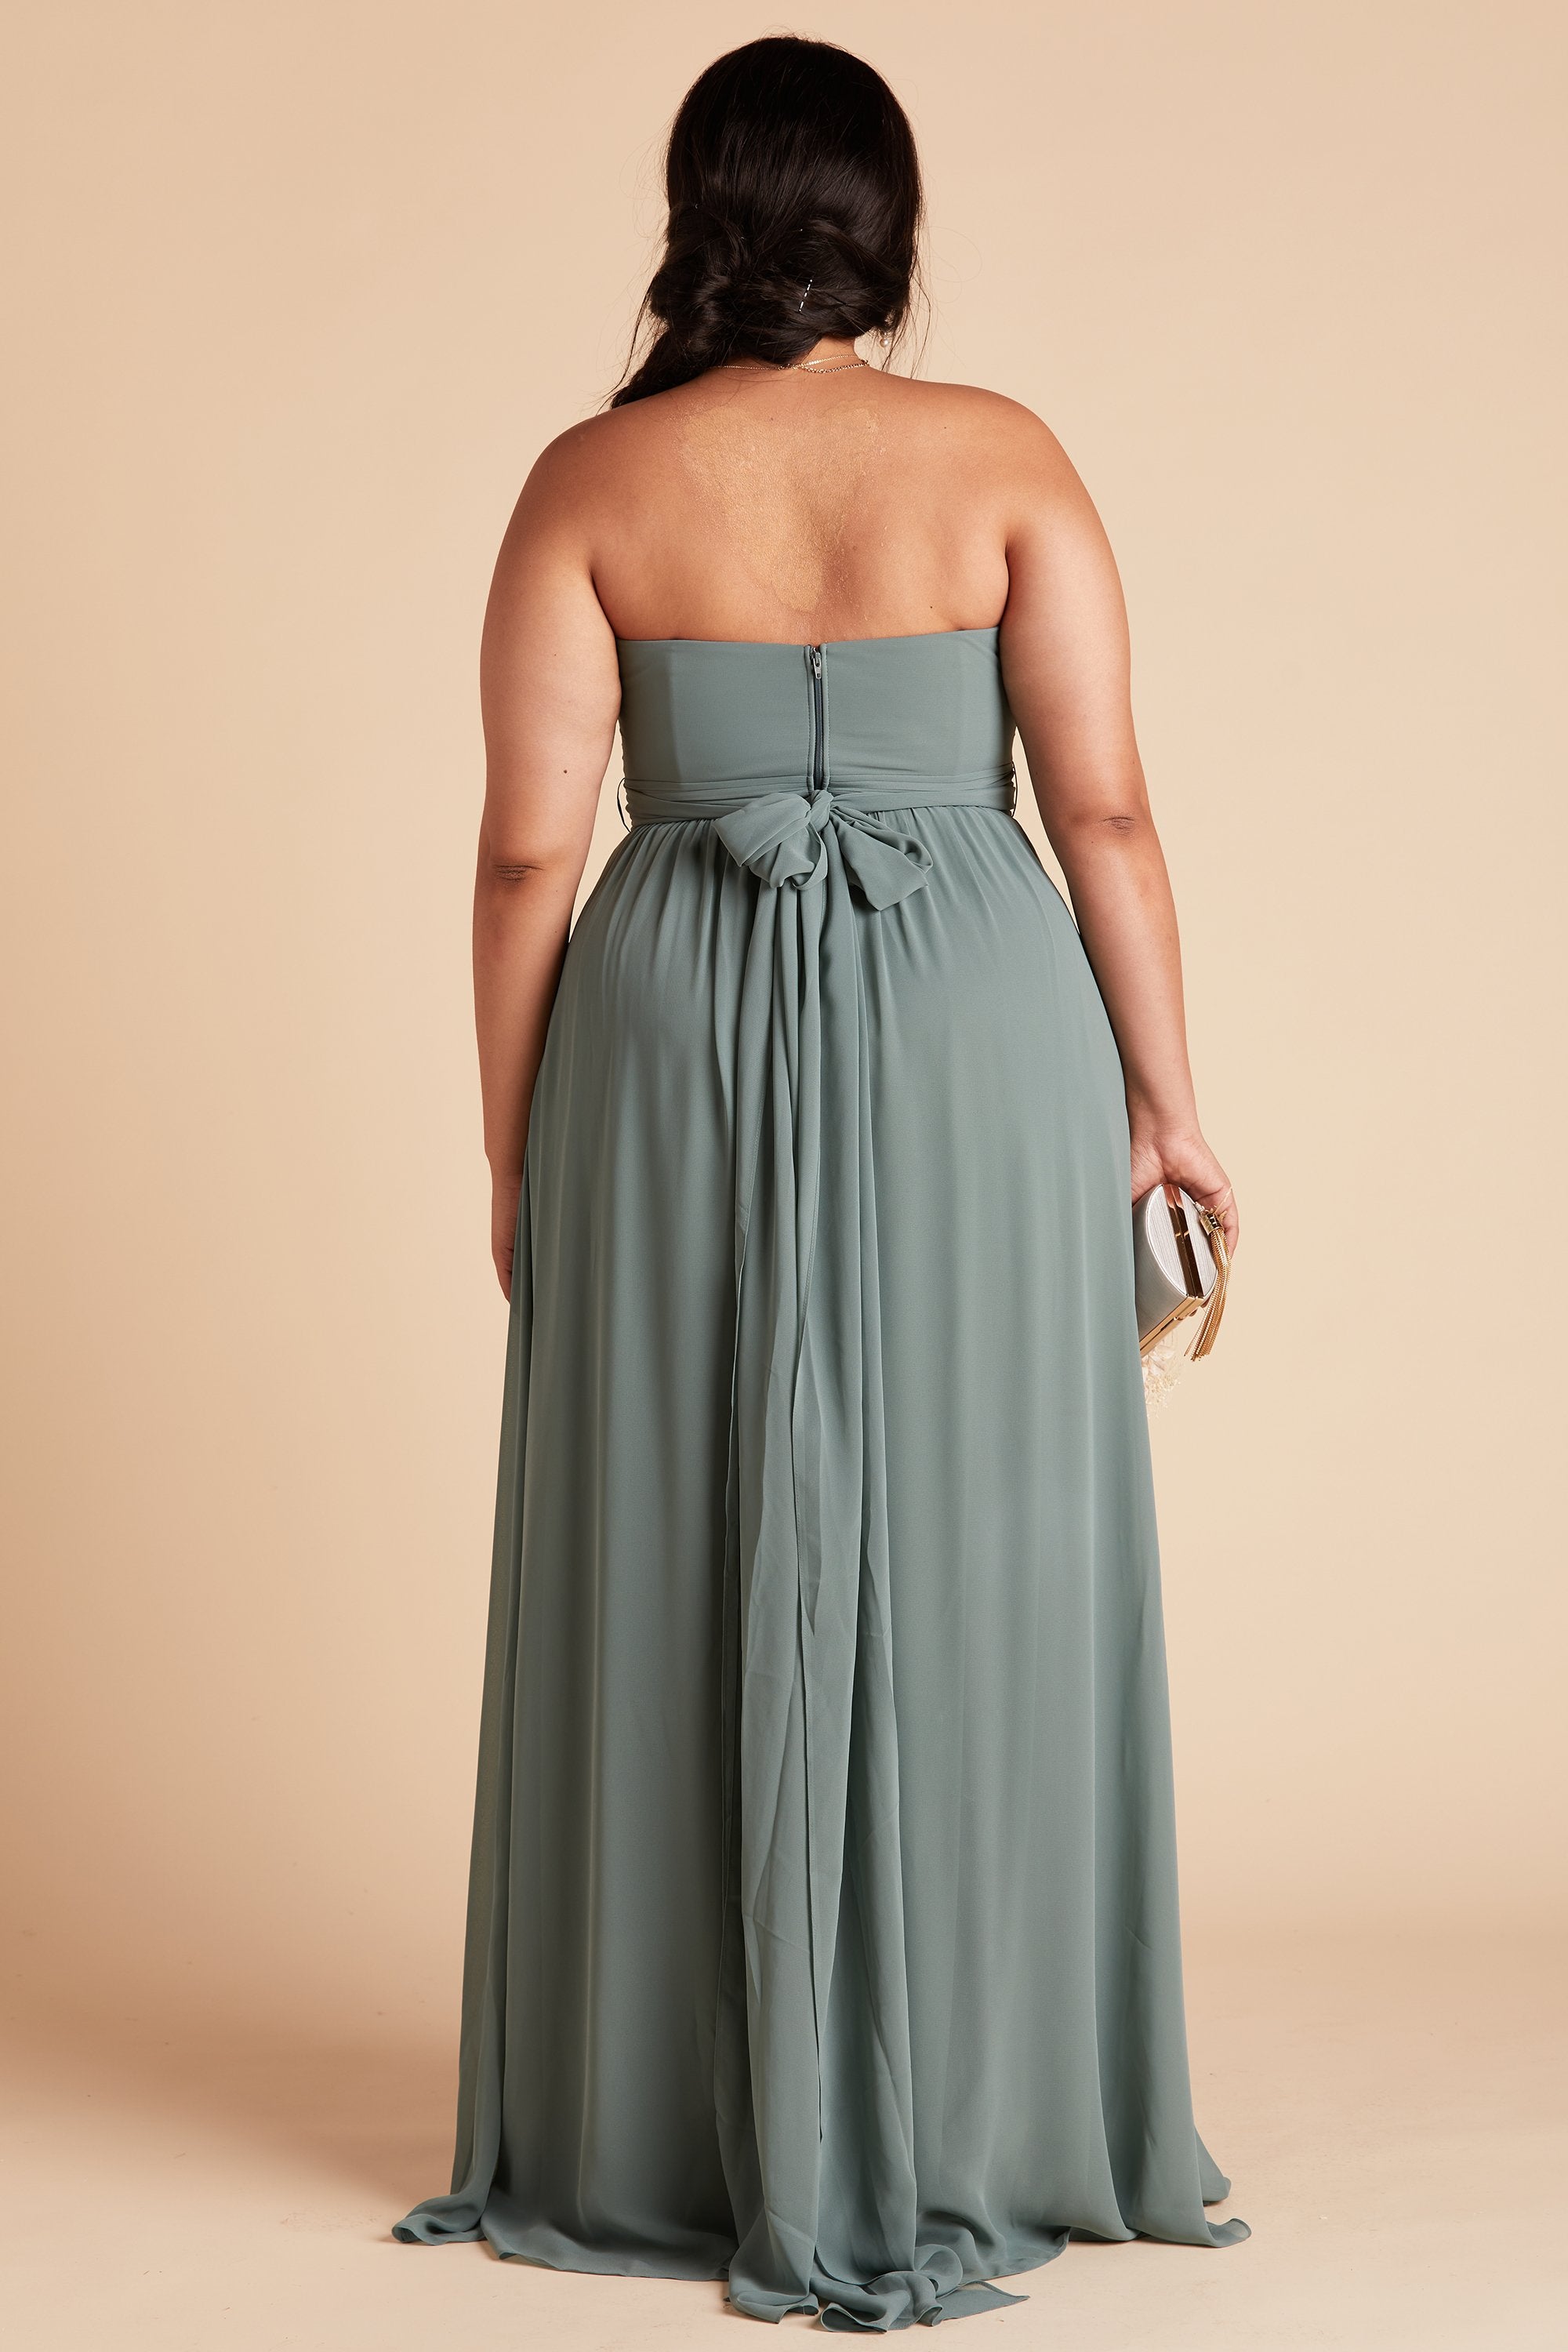 Back view of the Grace Convertible Plus Size Bridesmaid Dress in sea glass chiffon reveals an open back cut below the shoulder blades with front streamers tied around the waist in a delicate and flowing bow.